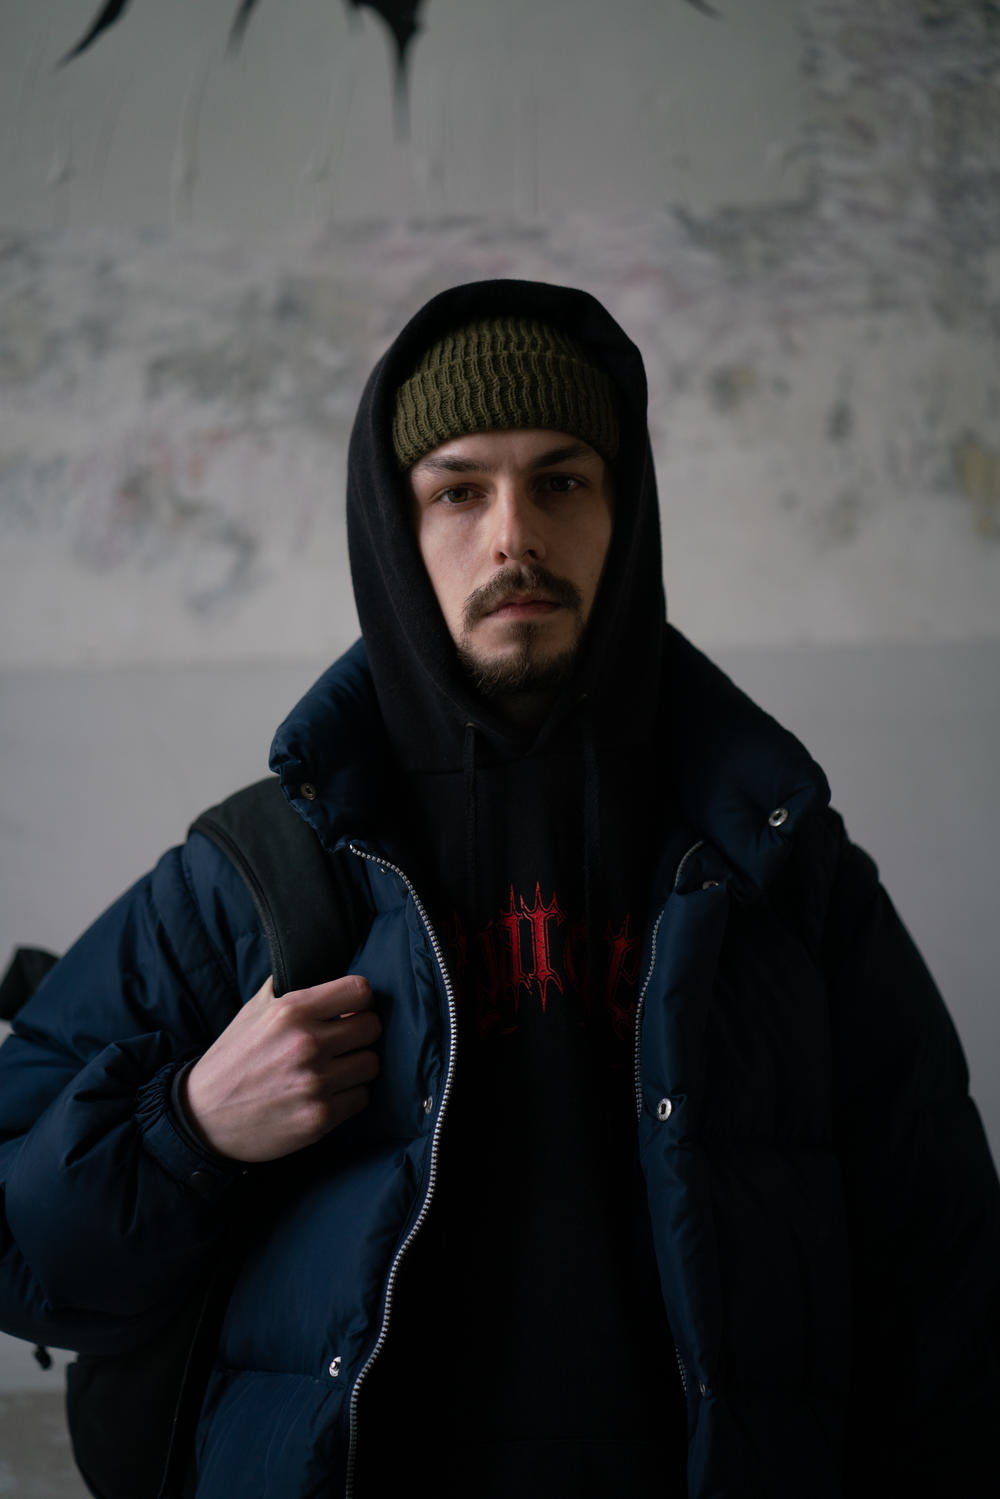 Stepan Burban, aka Palindrom, is a rapper in Lviv and is trying to help displaced people.